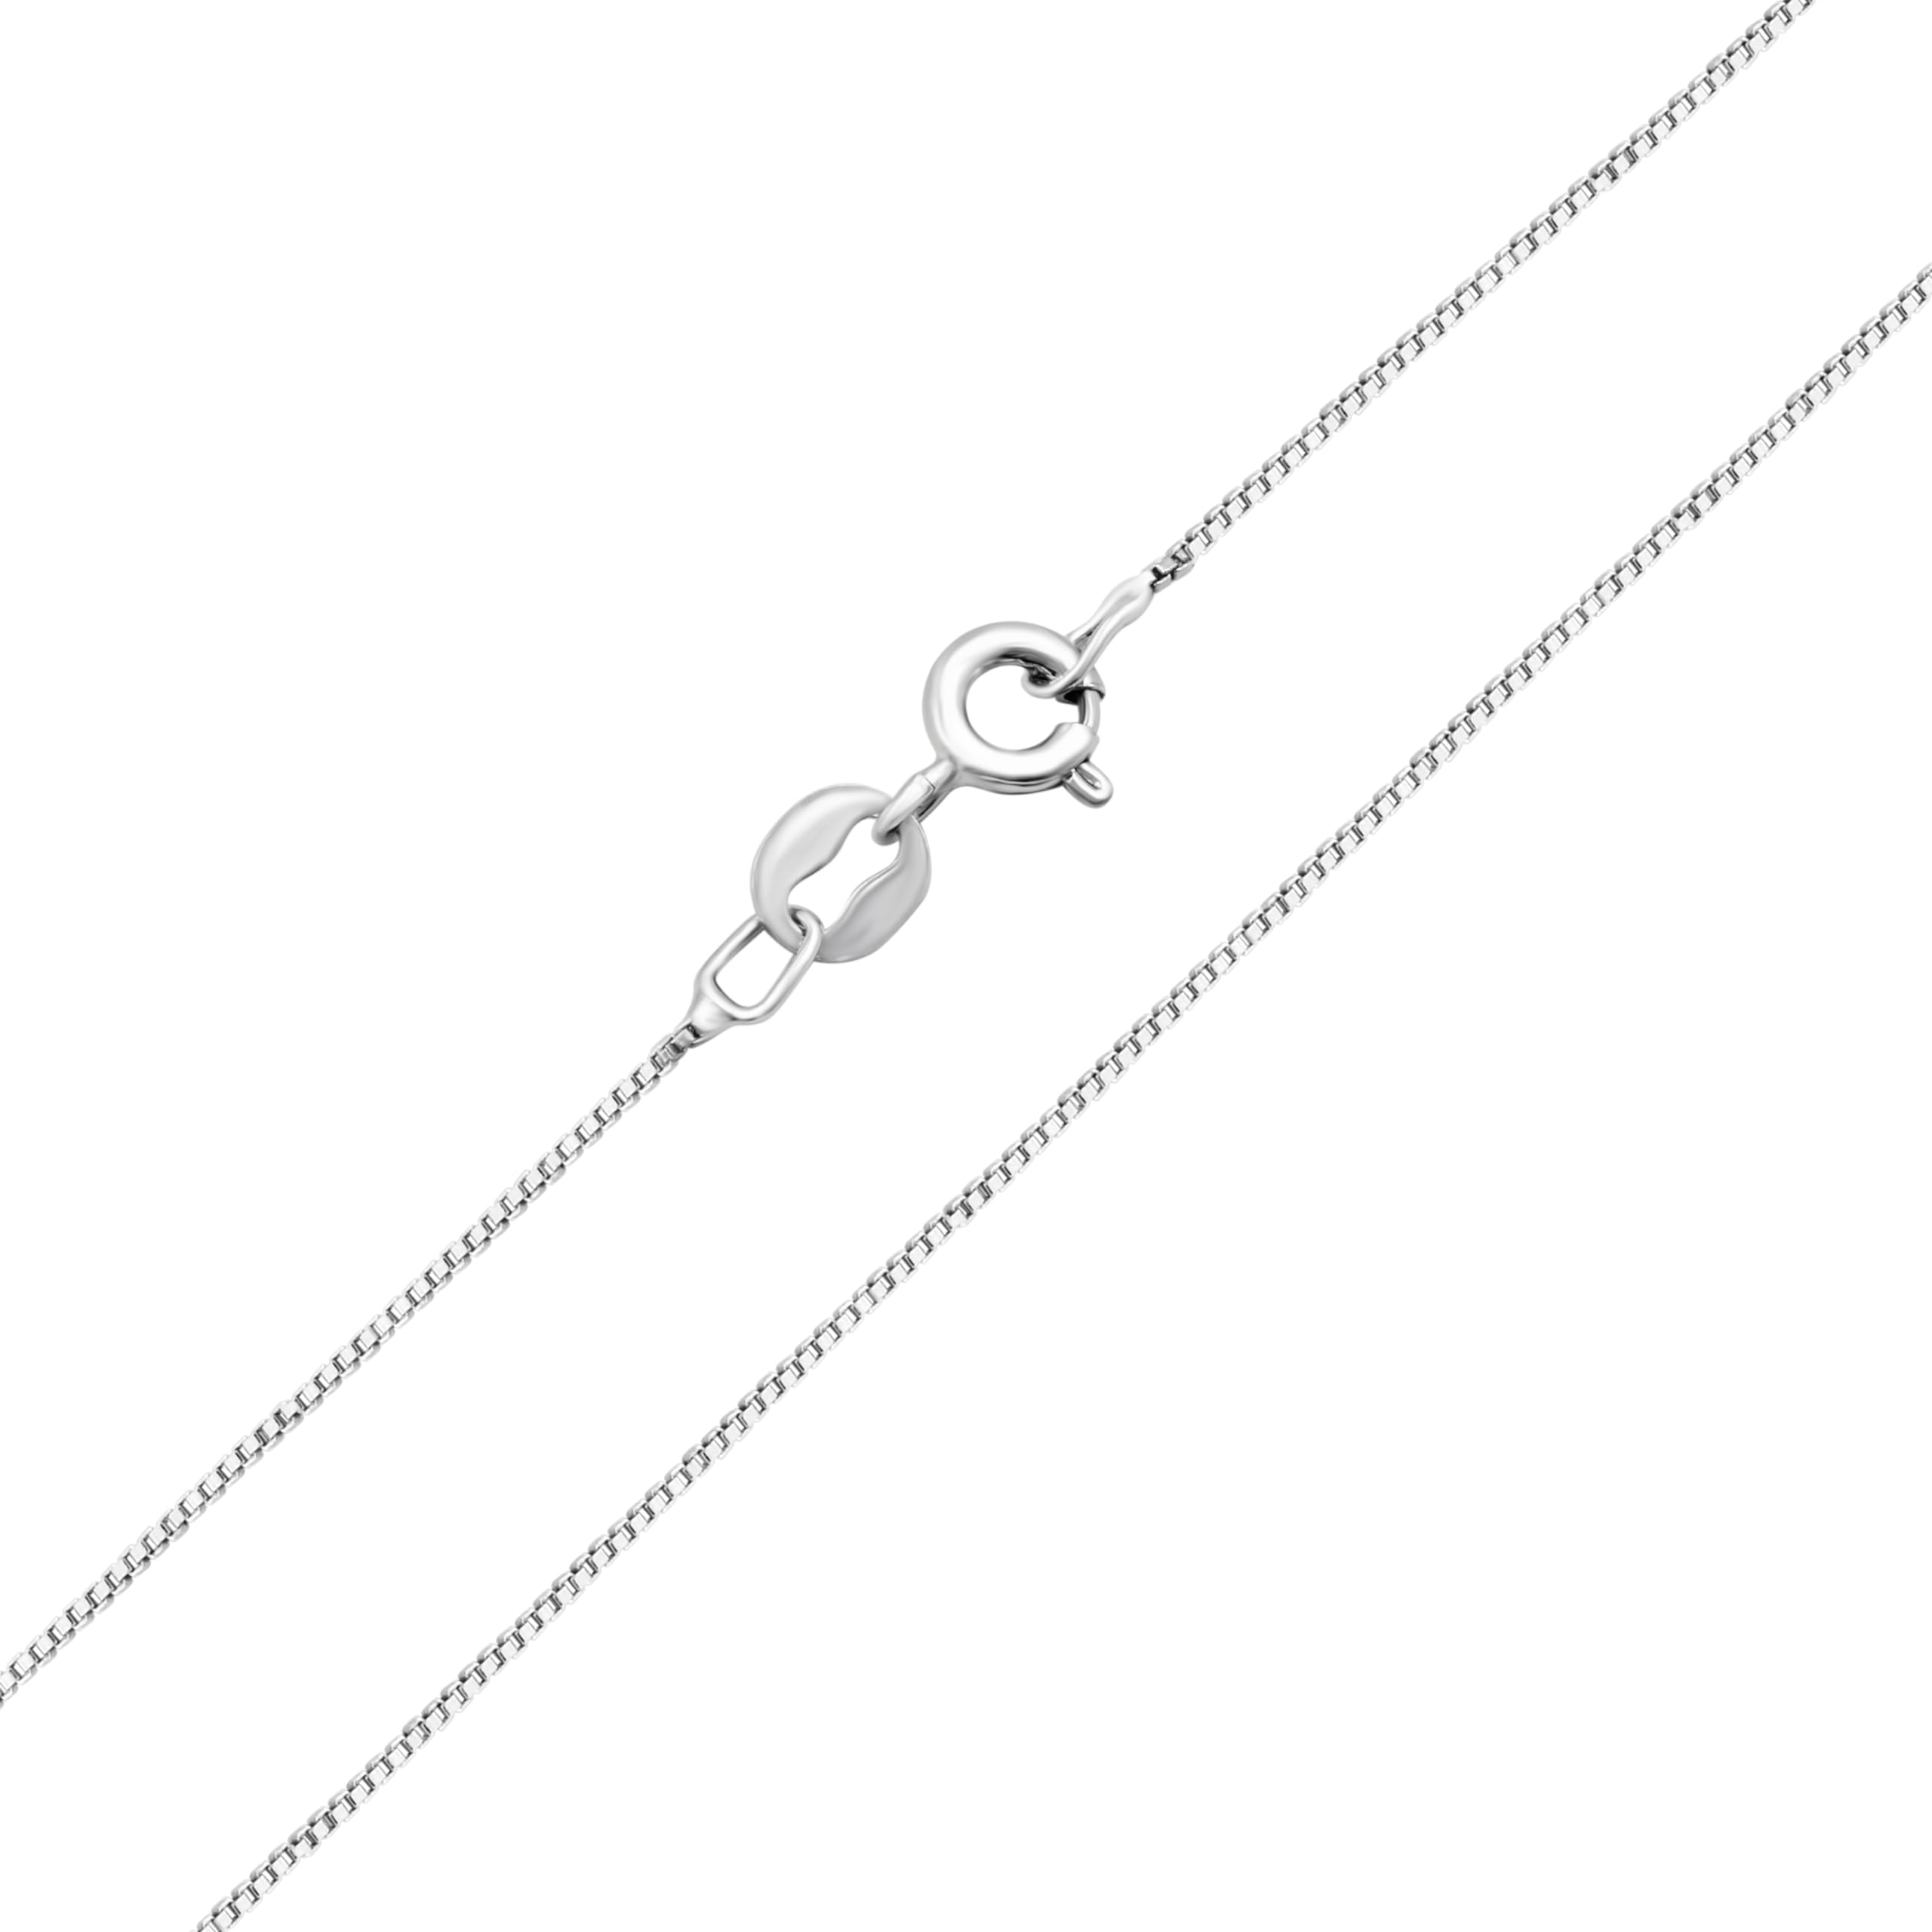 GILDED Sterling Silver 1/4cttw Natural Round-Cut Black Diamond Heart Pendant-Necklace with an 18 Inch Chain